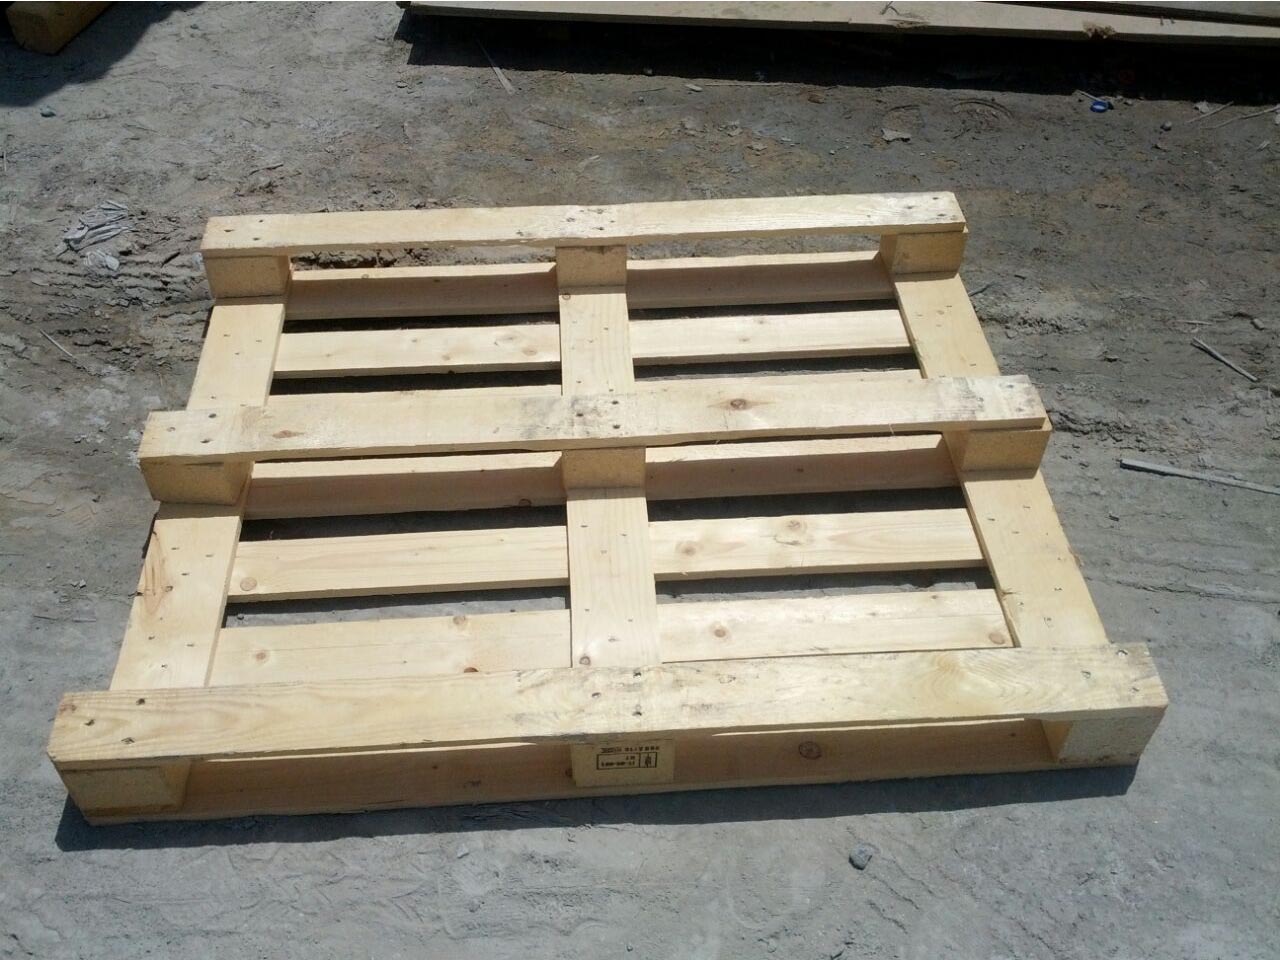 another view of a wooden pallet